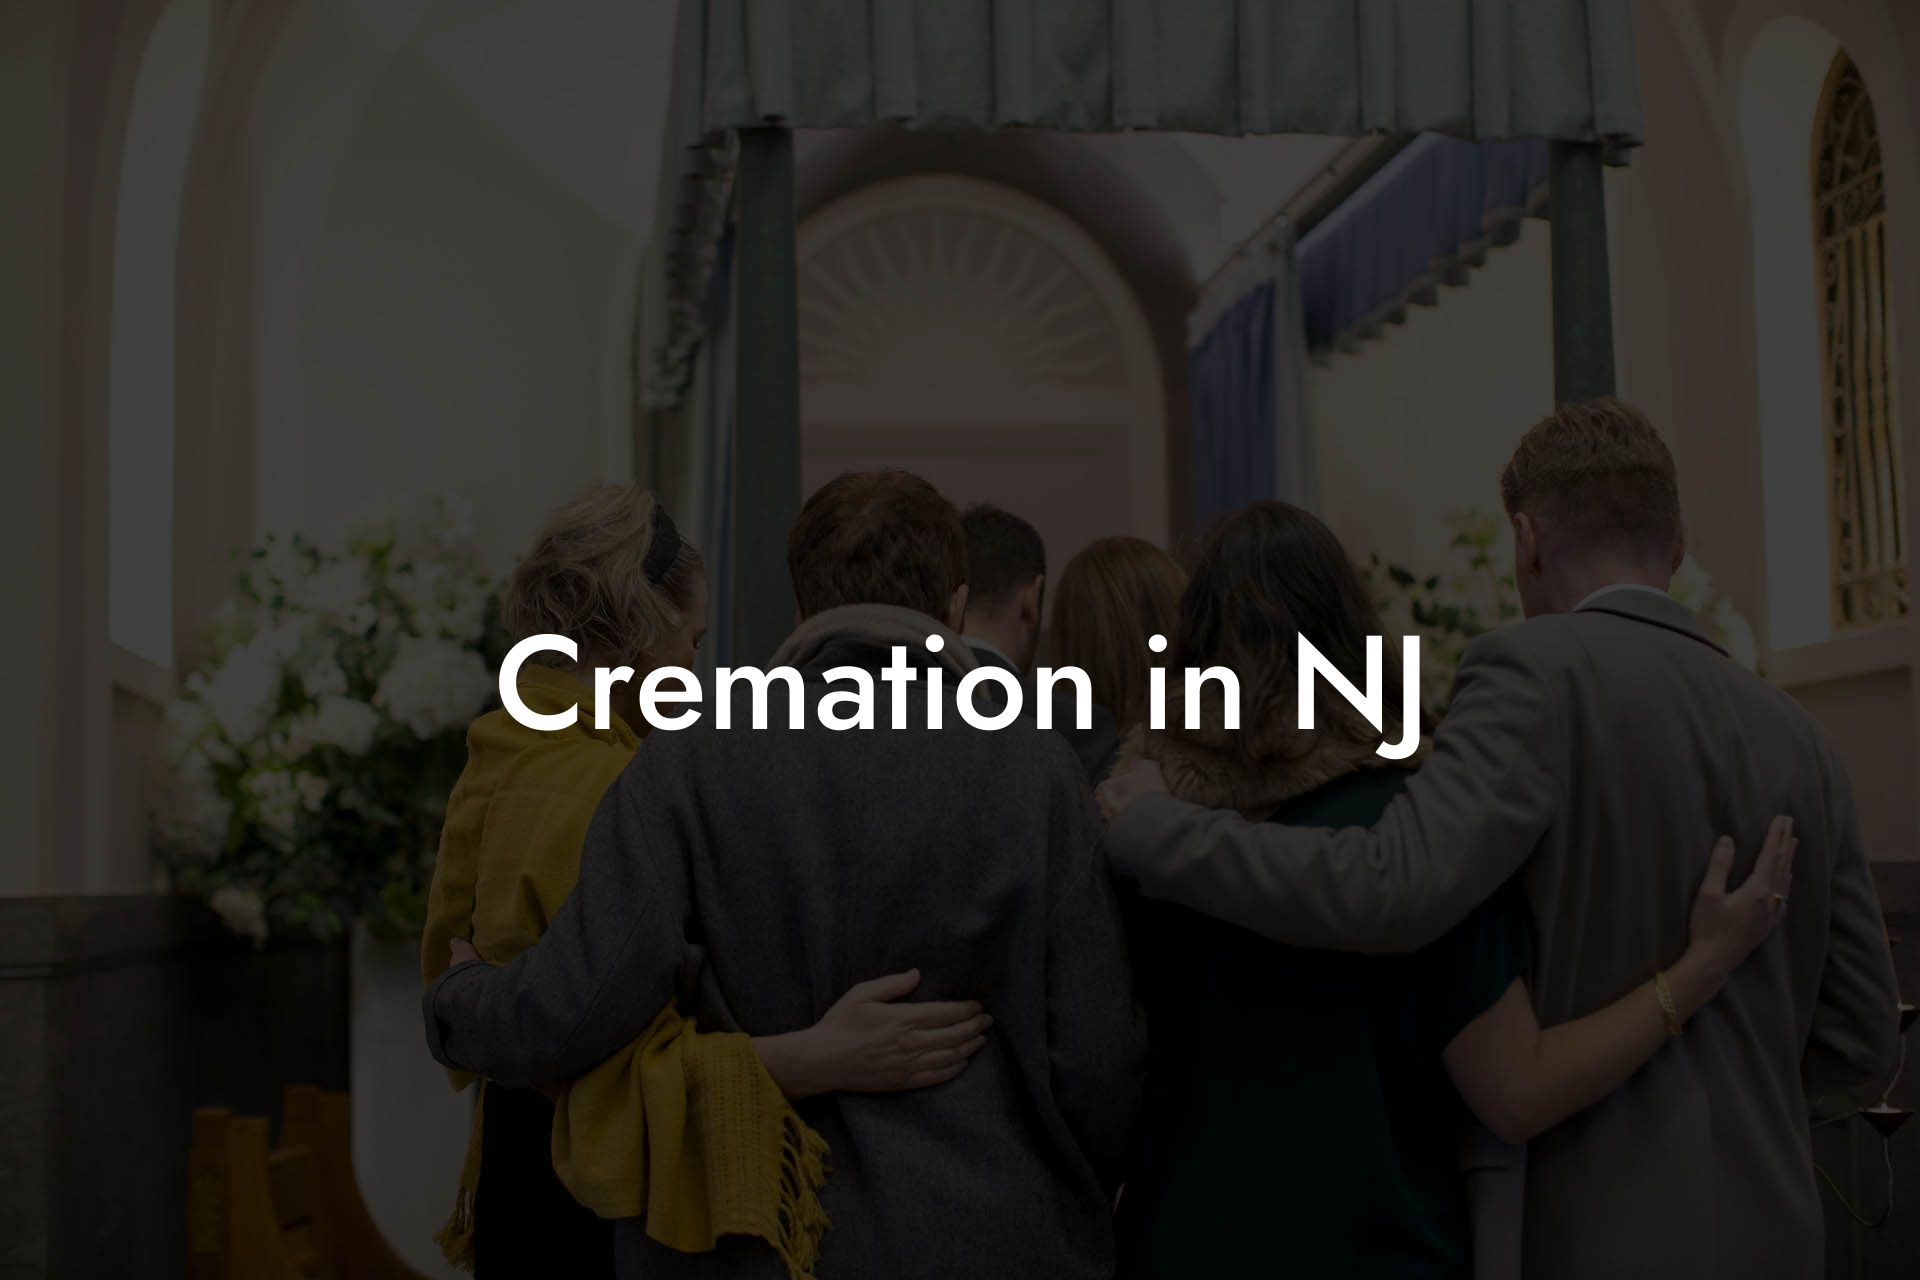 Cremation in NJ